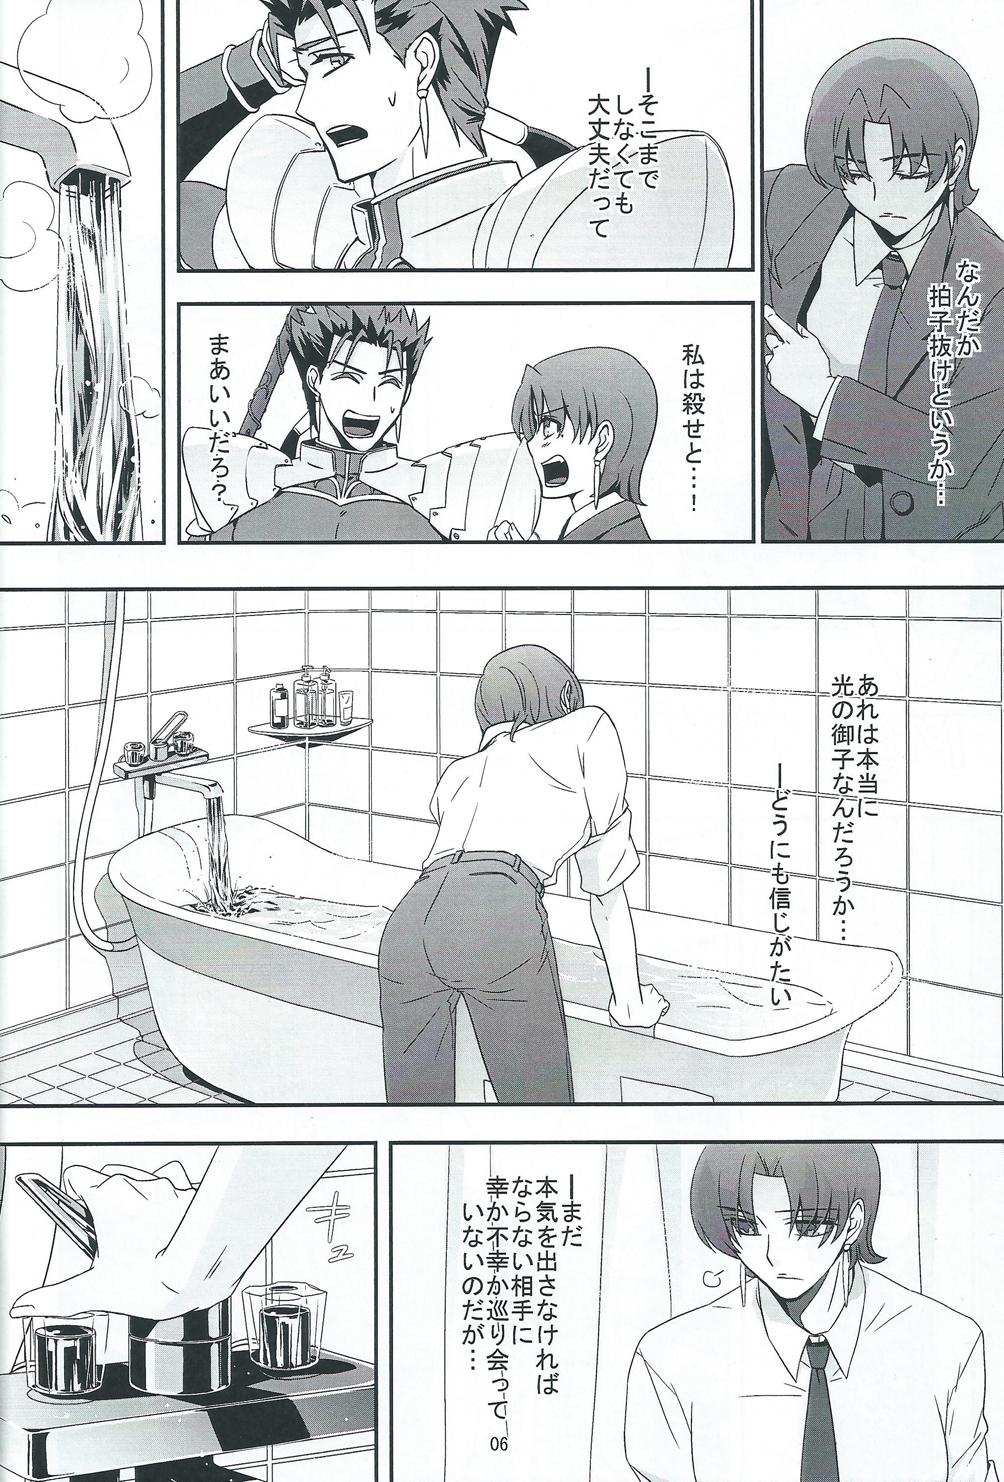 Toilet My Heart Goes Bang - Fate hollow ataraxia Fucking Pussy - Page 5